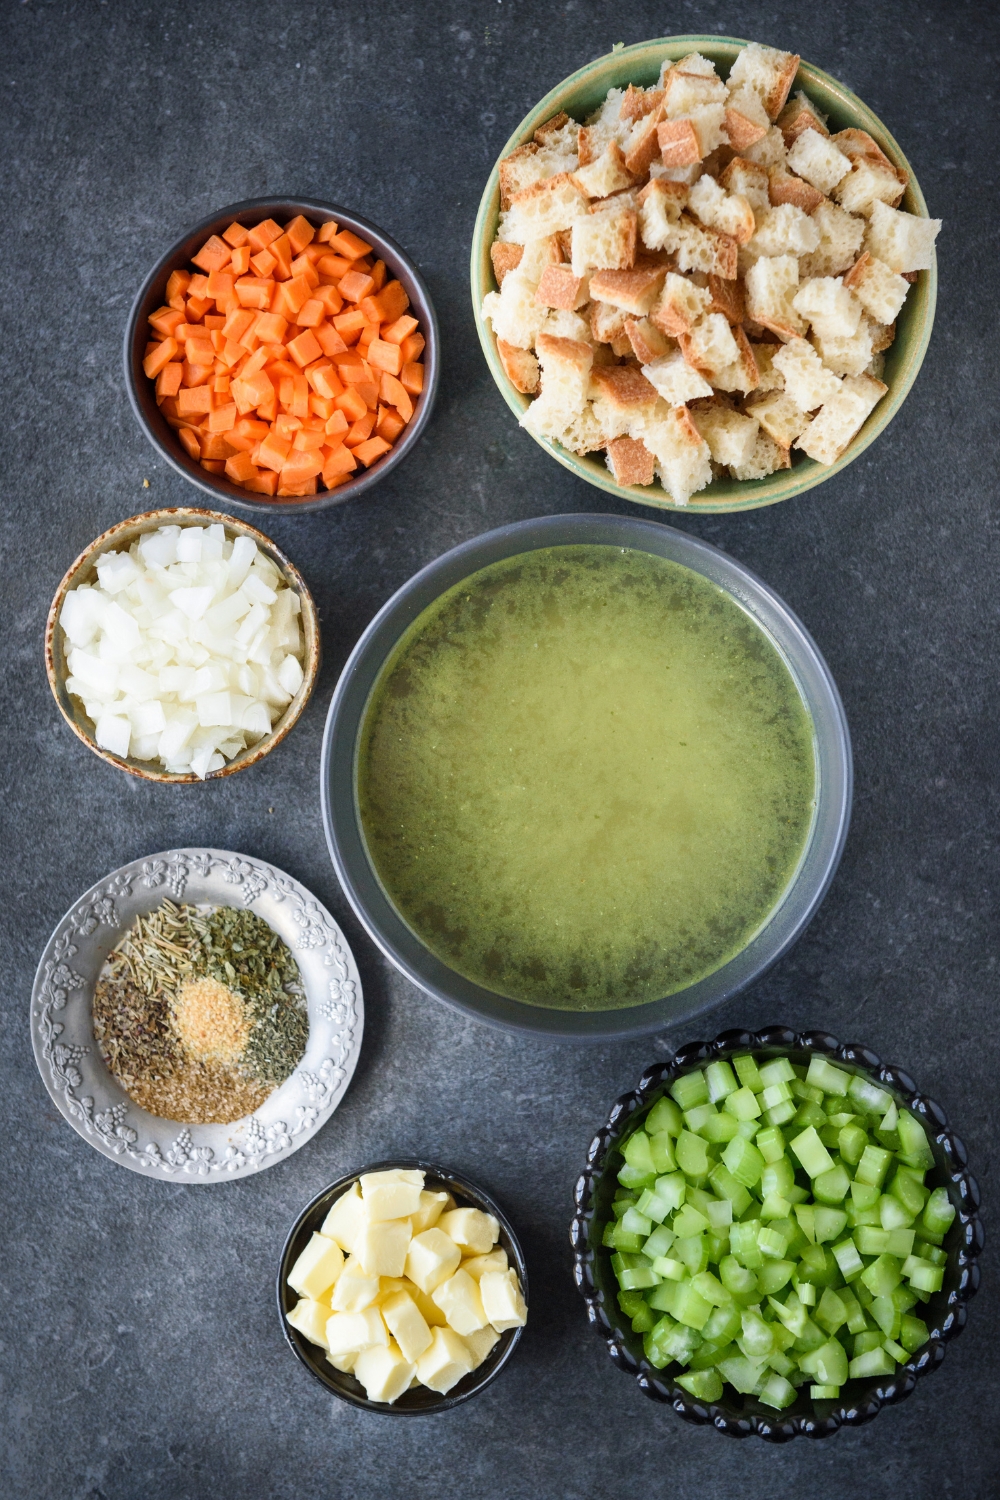 An assortment of ingredients including bowls of bread cubes, butter cubes, diced celery, diced carrots, diced onion, broth, and spices, all on a black counter.